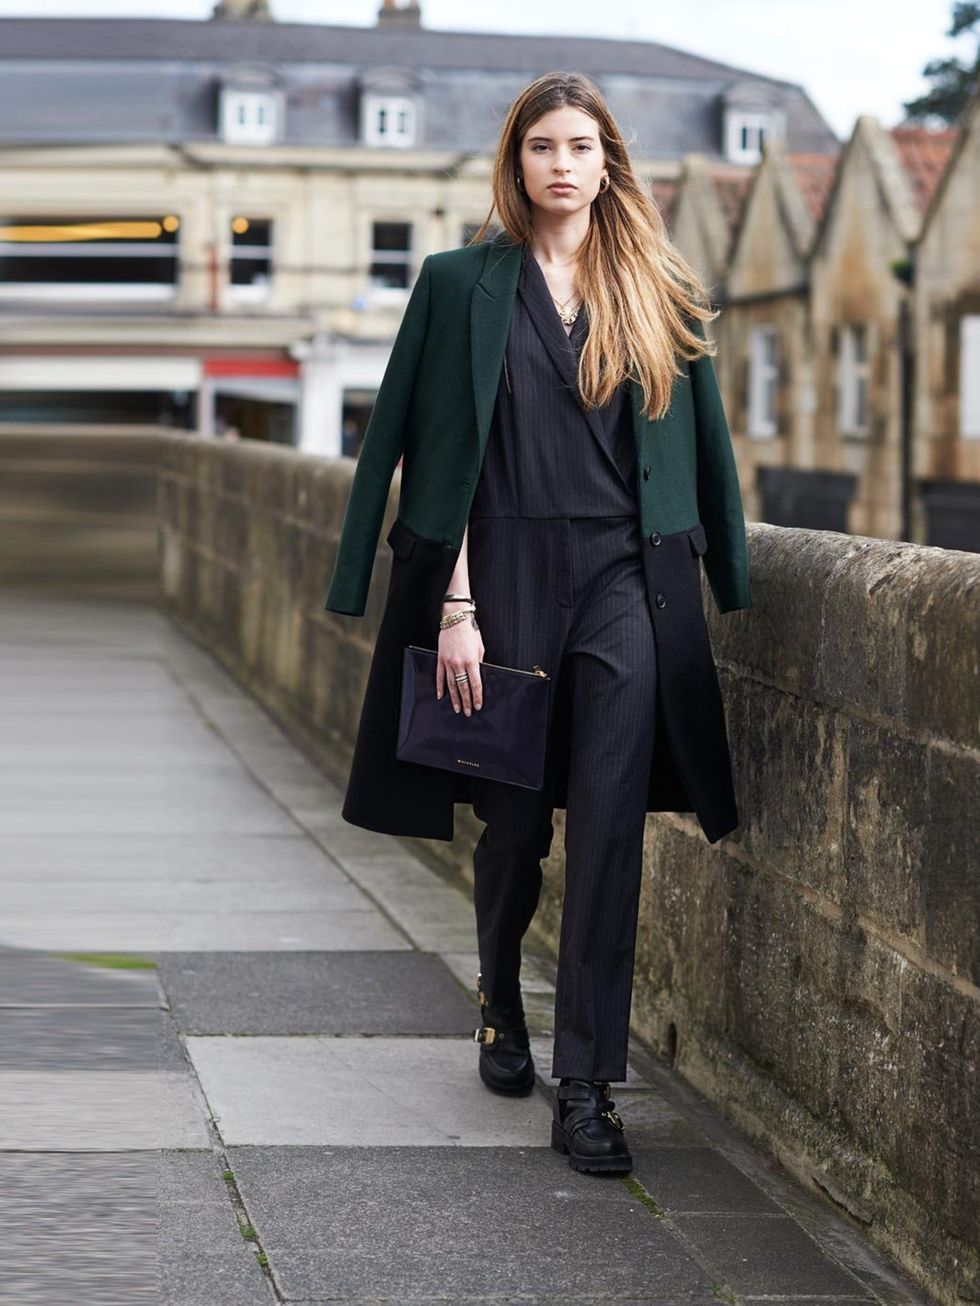 <p>Emma Hodgson, Bath</p><p>&amp;OtherStories Coat, ASOS Cotton Jumpsuit, Freedom at Topshop Jewellery, Whistles bag</p><p><a href="http://www.elleuk.com/magazine">(featured in the January Issue of ELLE)</a></p><p><em><a href="http://www.elleuk.com/style/